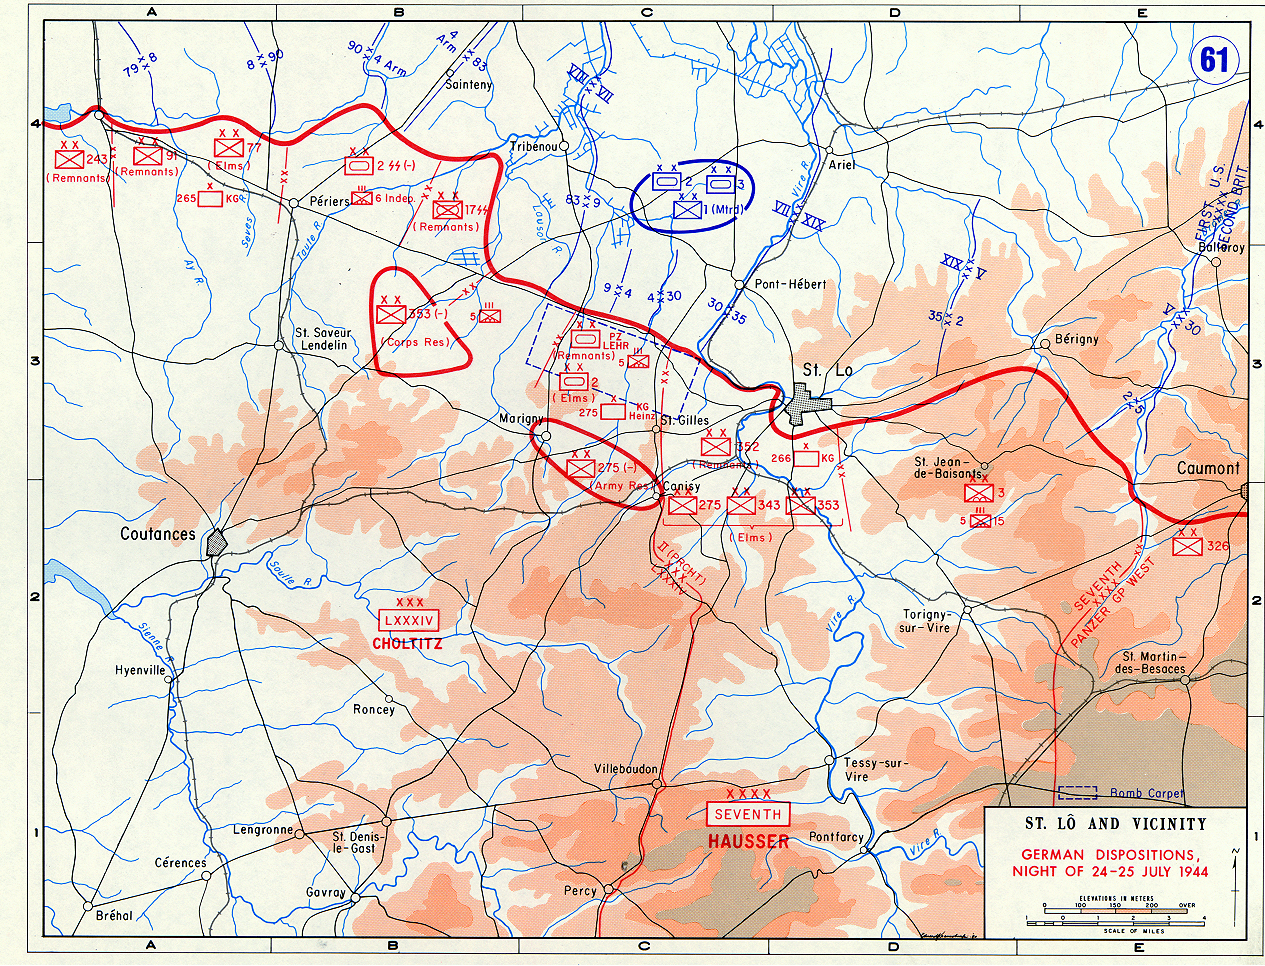 Map depicting the situation near Saint-Lô, France during the night of 24-25 Jul 1944